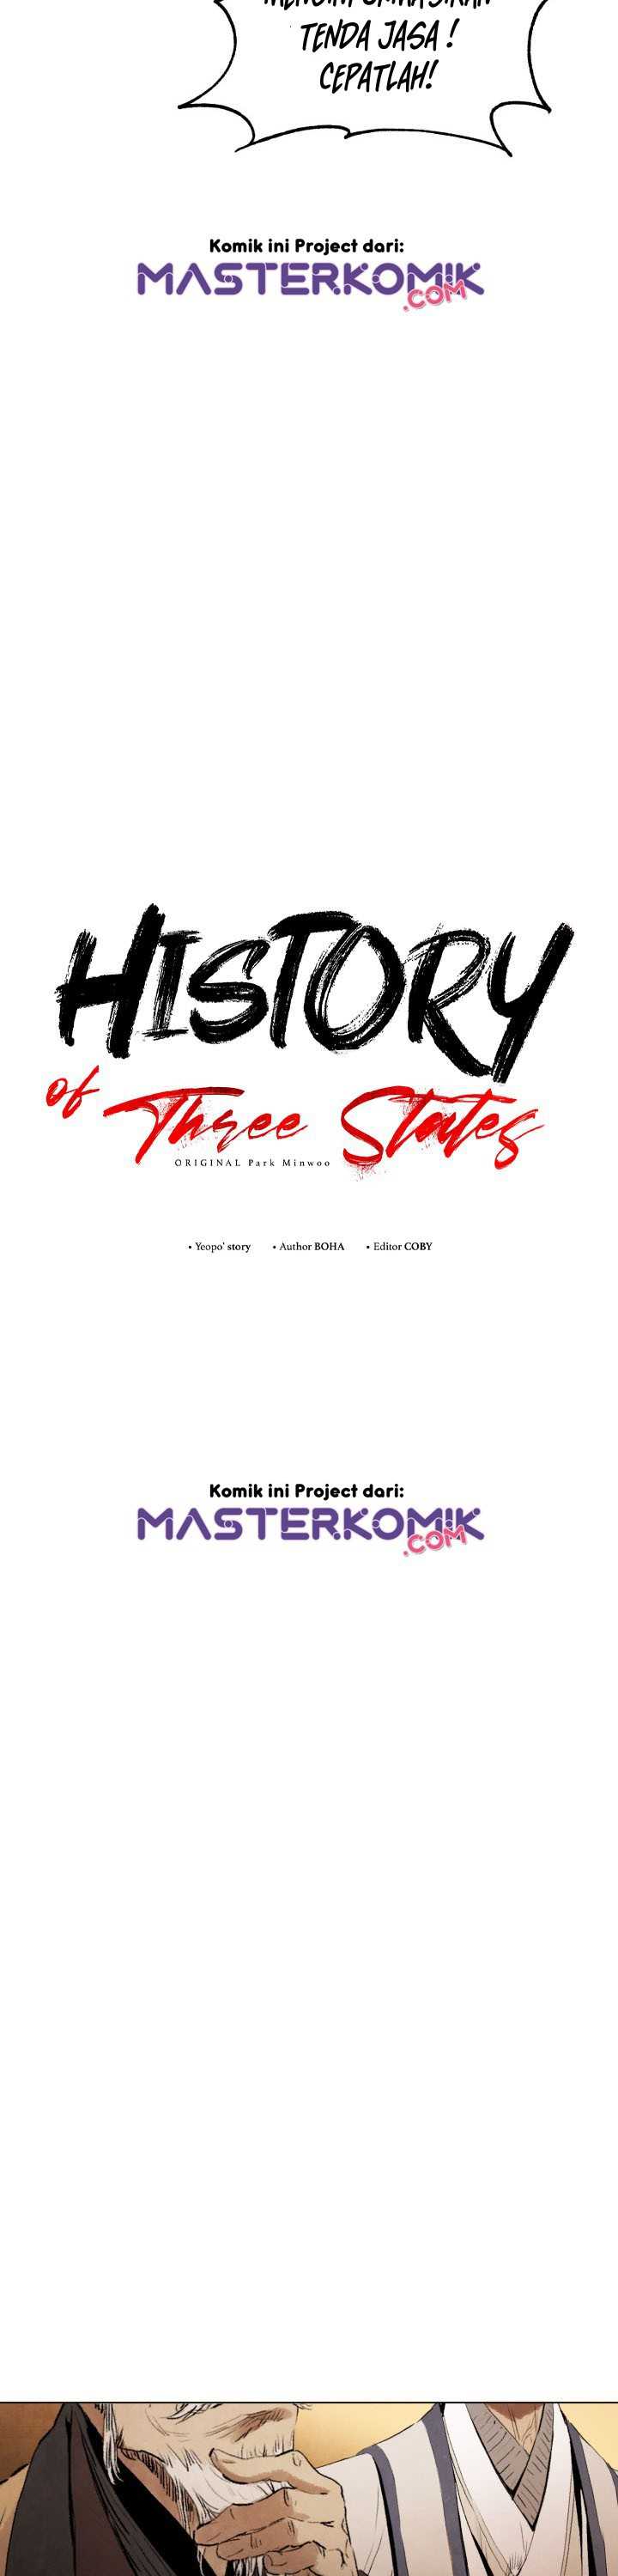 History Of The Three States Chapter 3